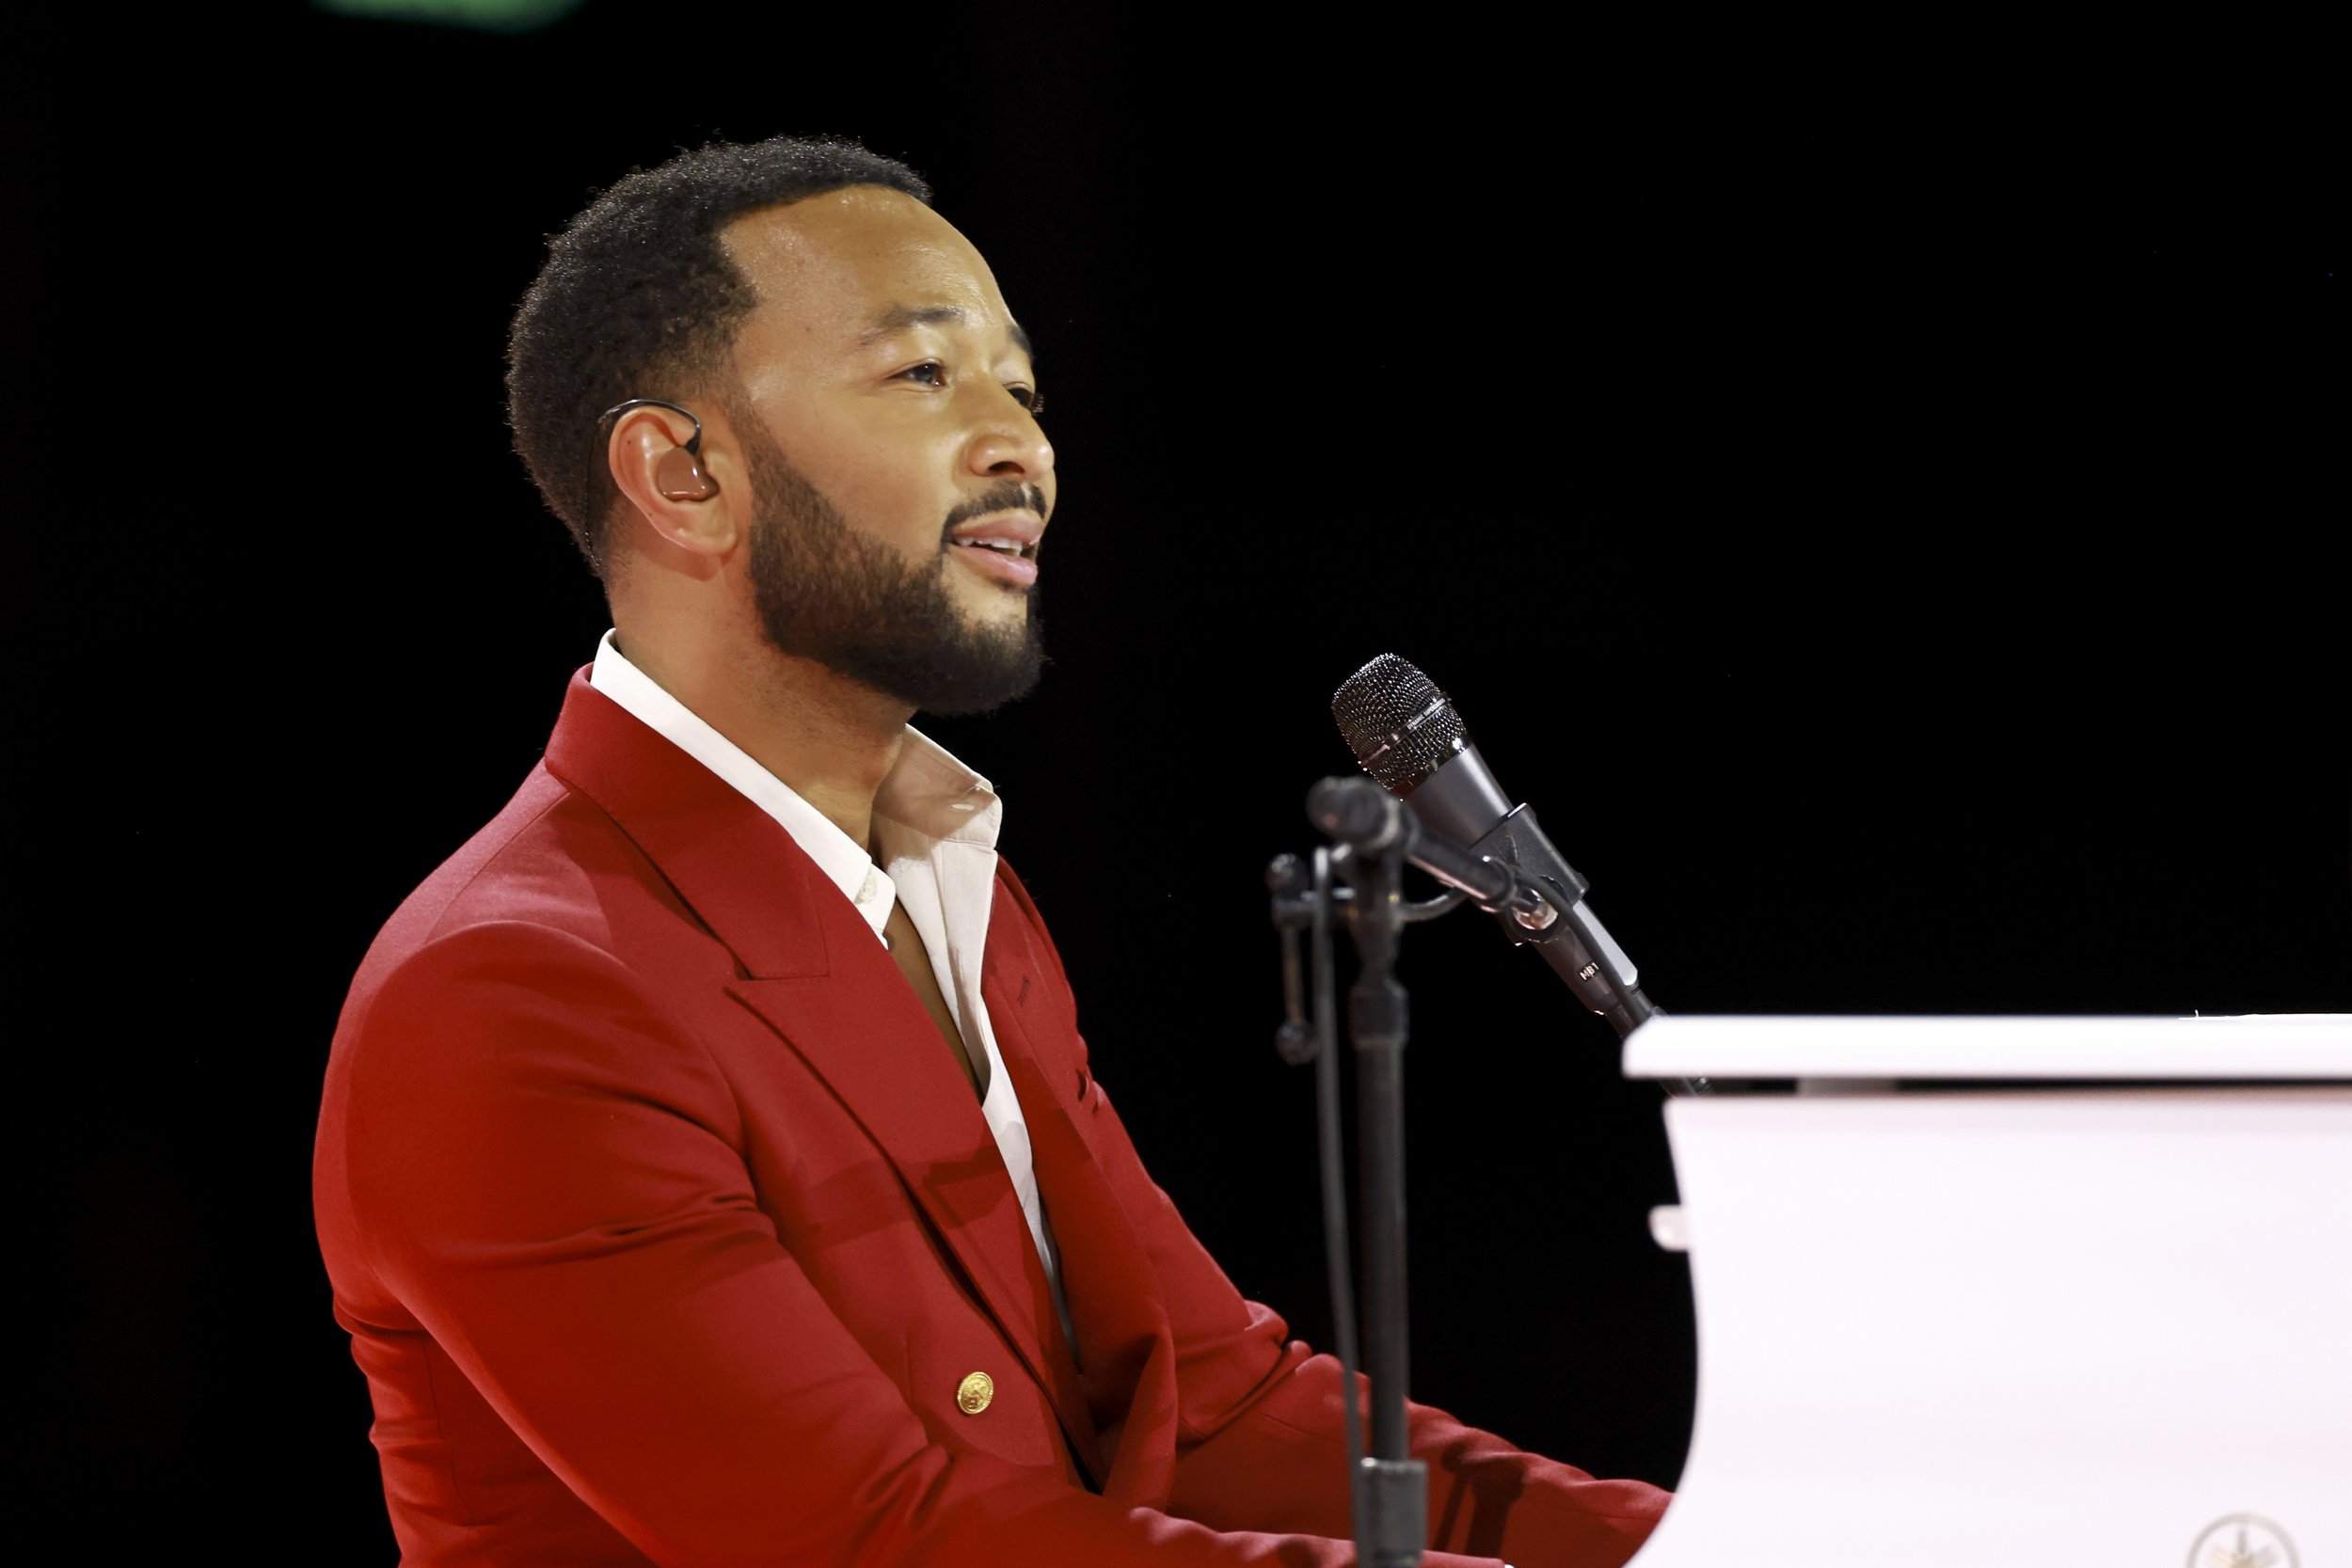  LOS ANGELES, CALIFORNIA - FEBRUARY 03: John Legend performs onstage during MusiCares Persons of the Year Honoring Berry Gordy and Smokey Robinson at Los Angeles Convention Center on February 03, 2023 in Los Angeles, California. (Photo by Matt Winkel